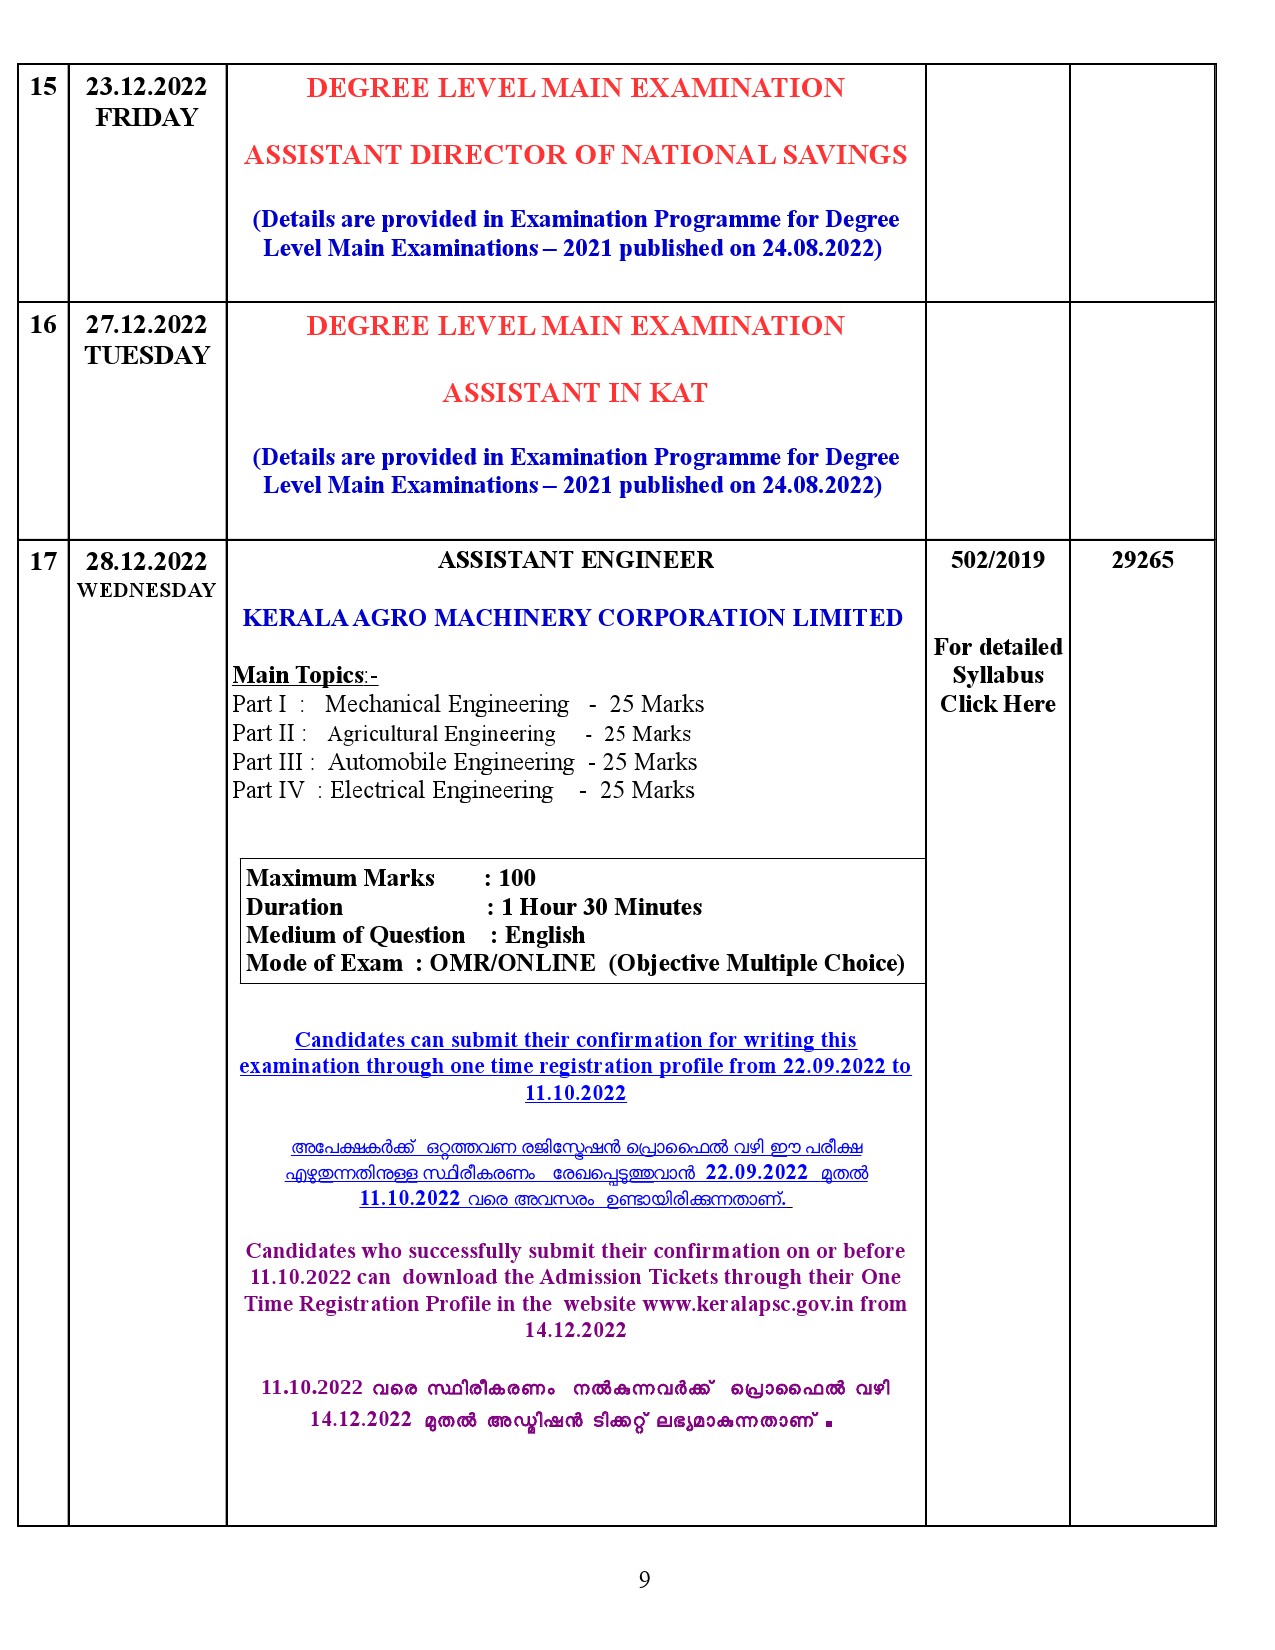 EXAMINATION PROGRAMME FOR THE MONTH OF DECEMBER 2022 - Notification Image 9